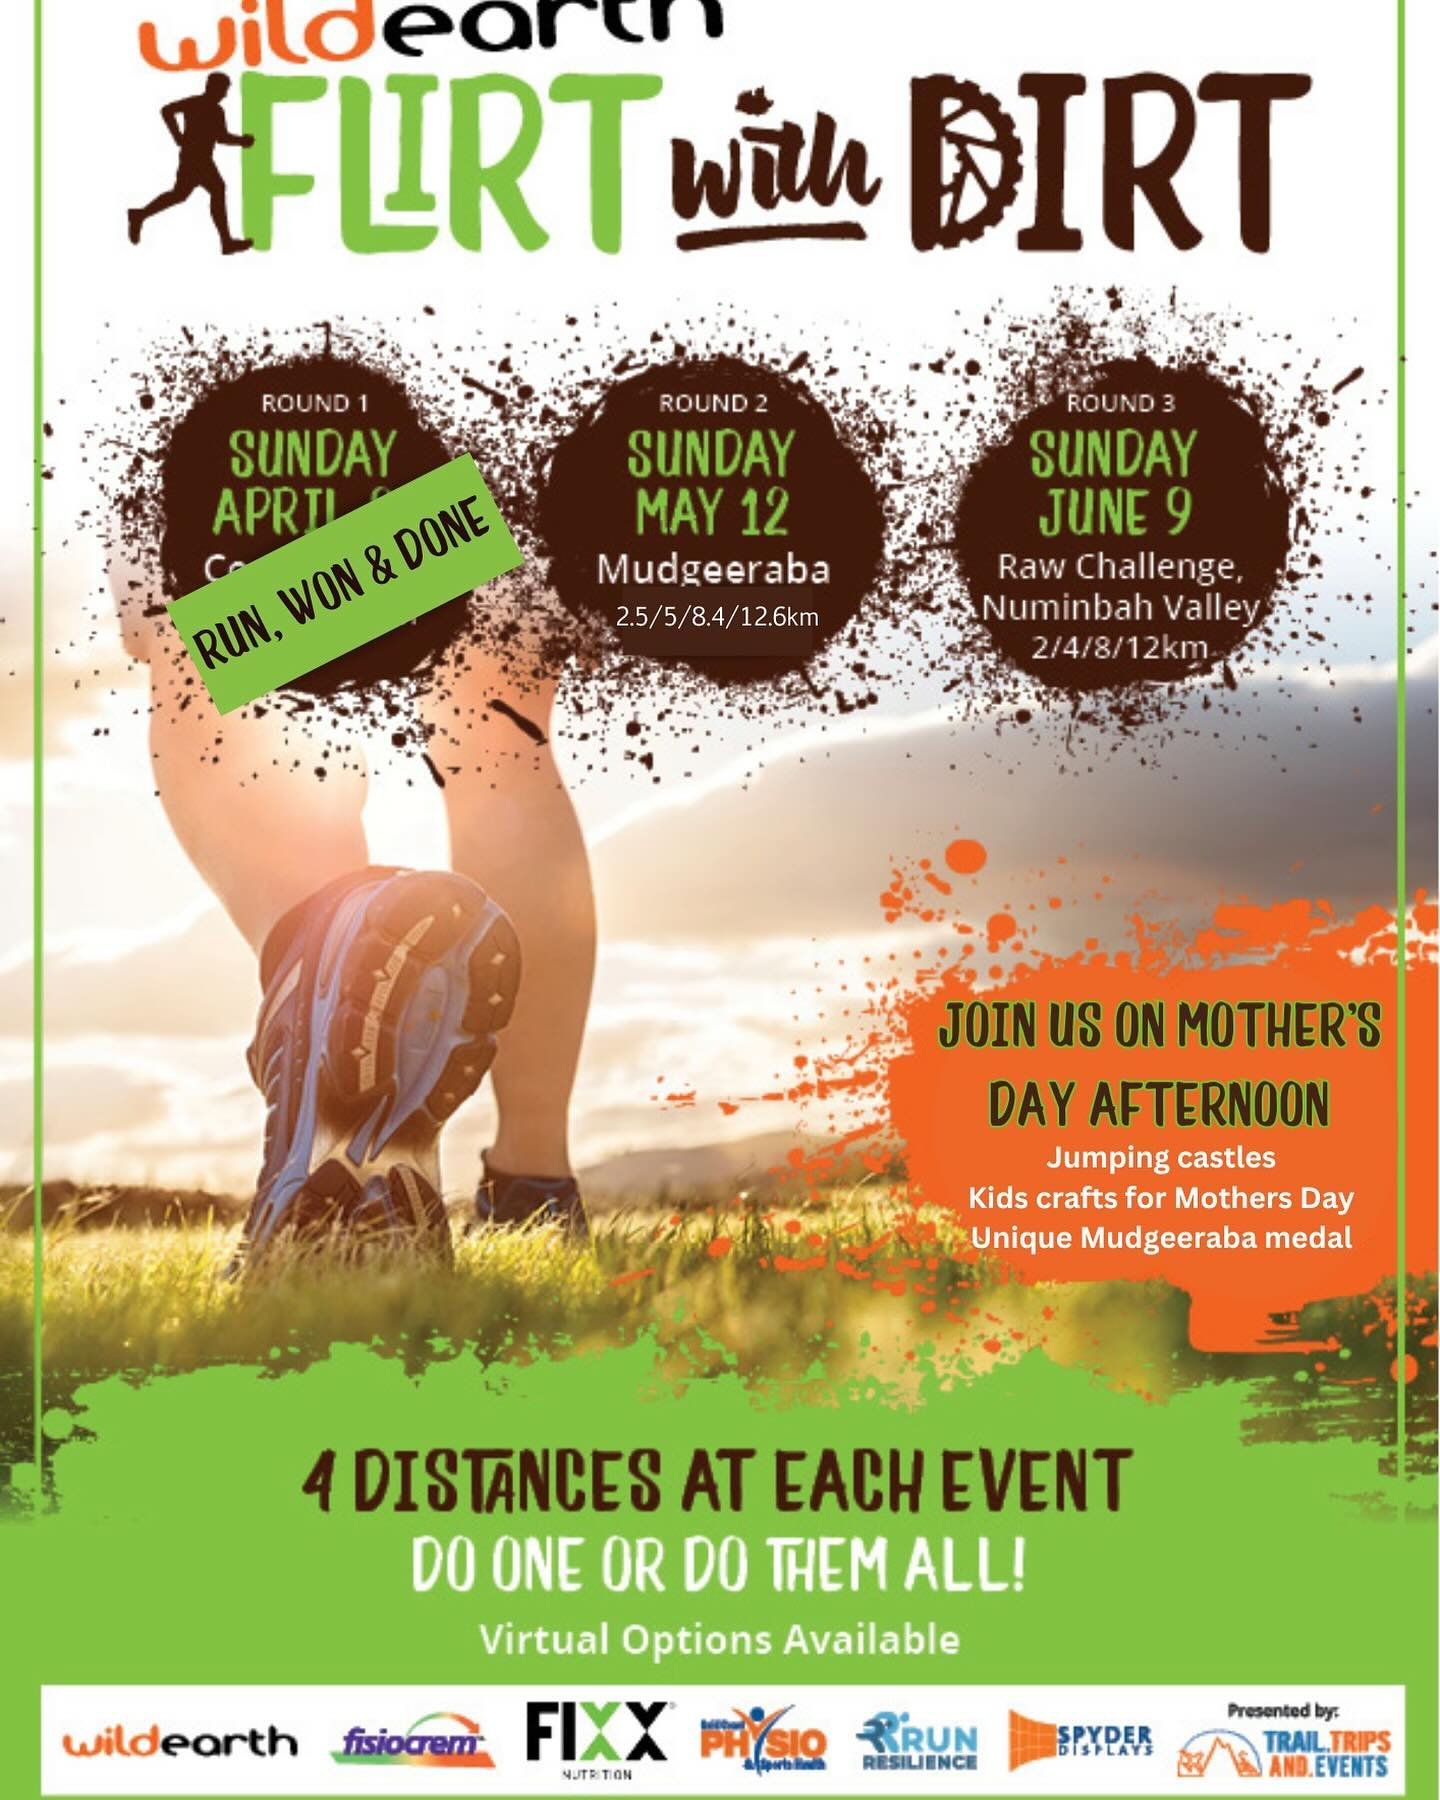 Looking for something fun, local and active to do? 
Something for the family on Mother&rsquo;s Day afternoon?
Kids enjoying their cross country season? 

Come down to Hinterland Regional Park in #Mudgeeraba and &lsquo;Flirt with Dirt&rsquo; - a fun o